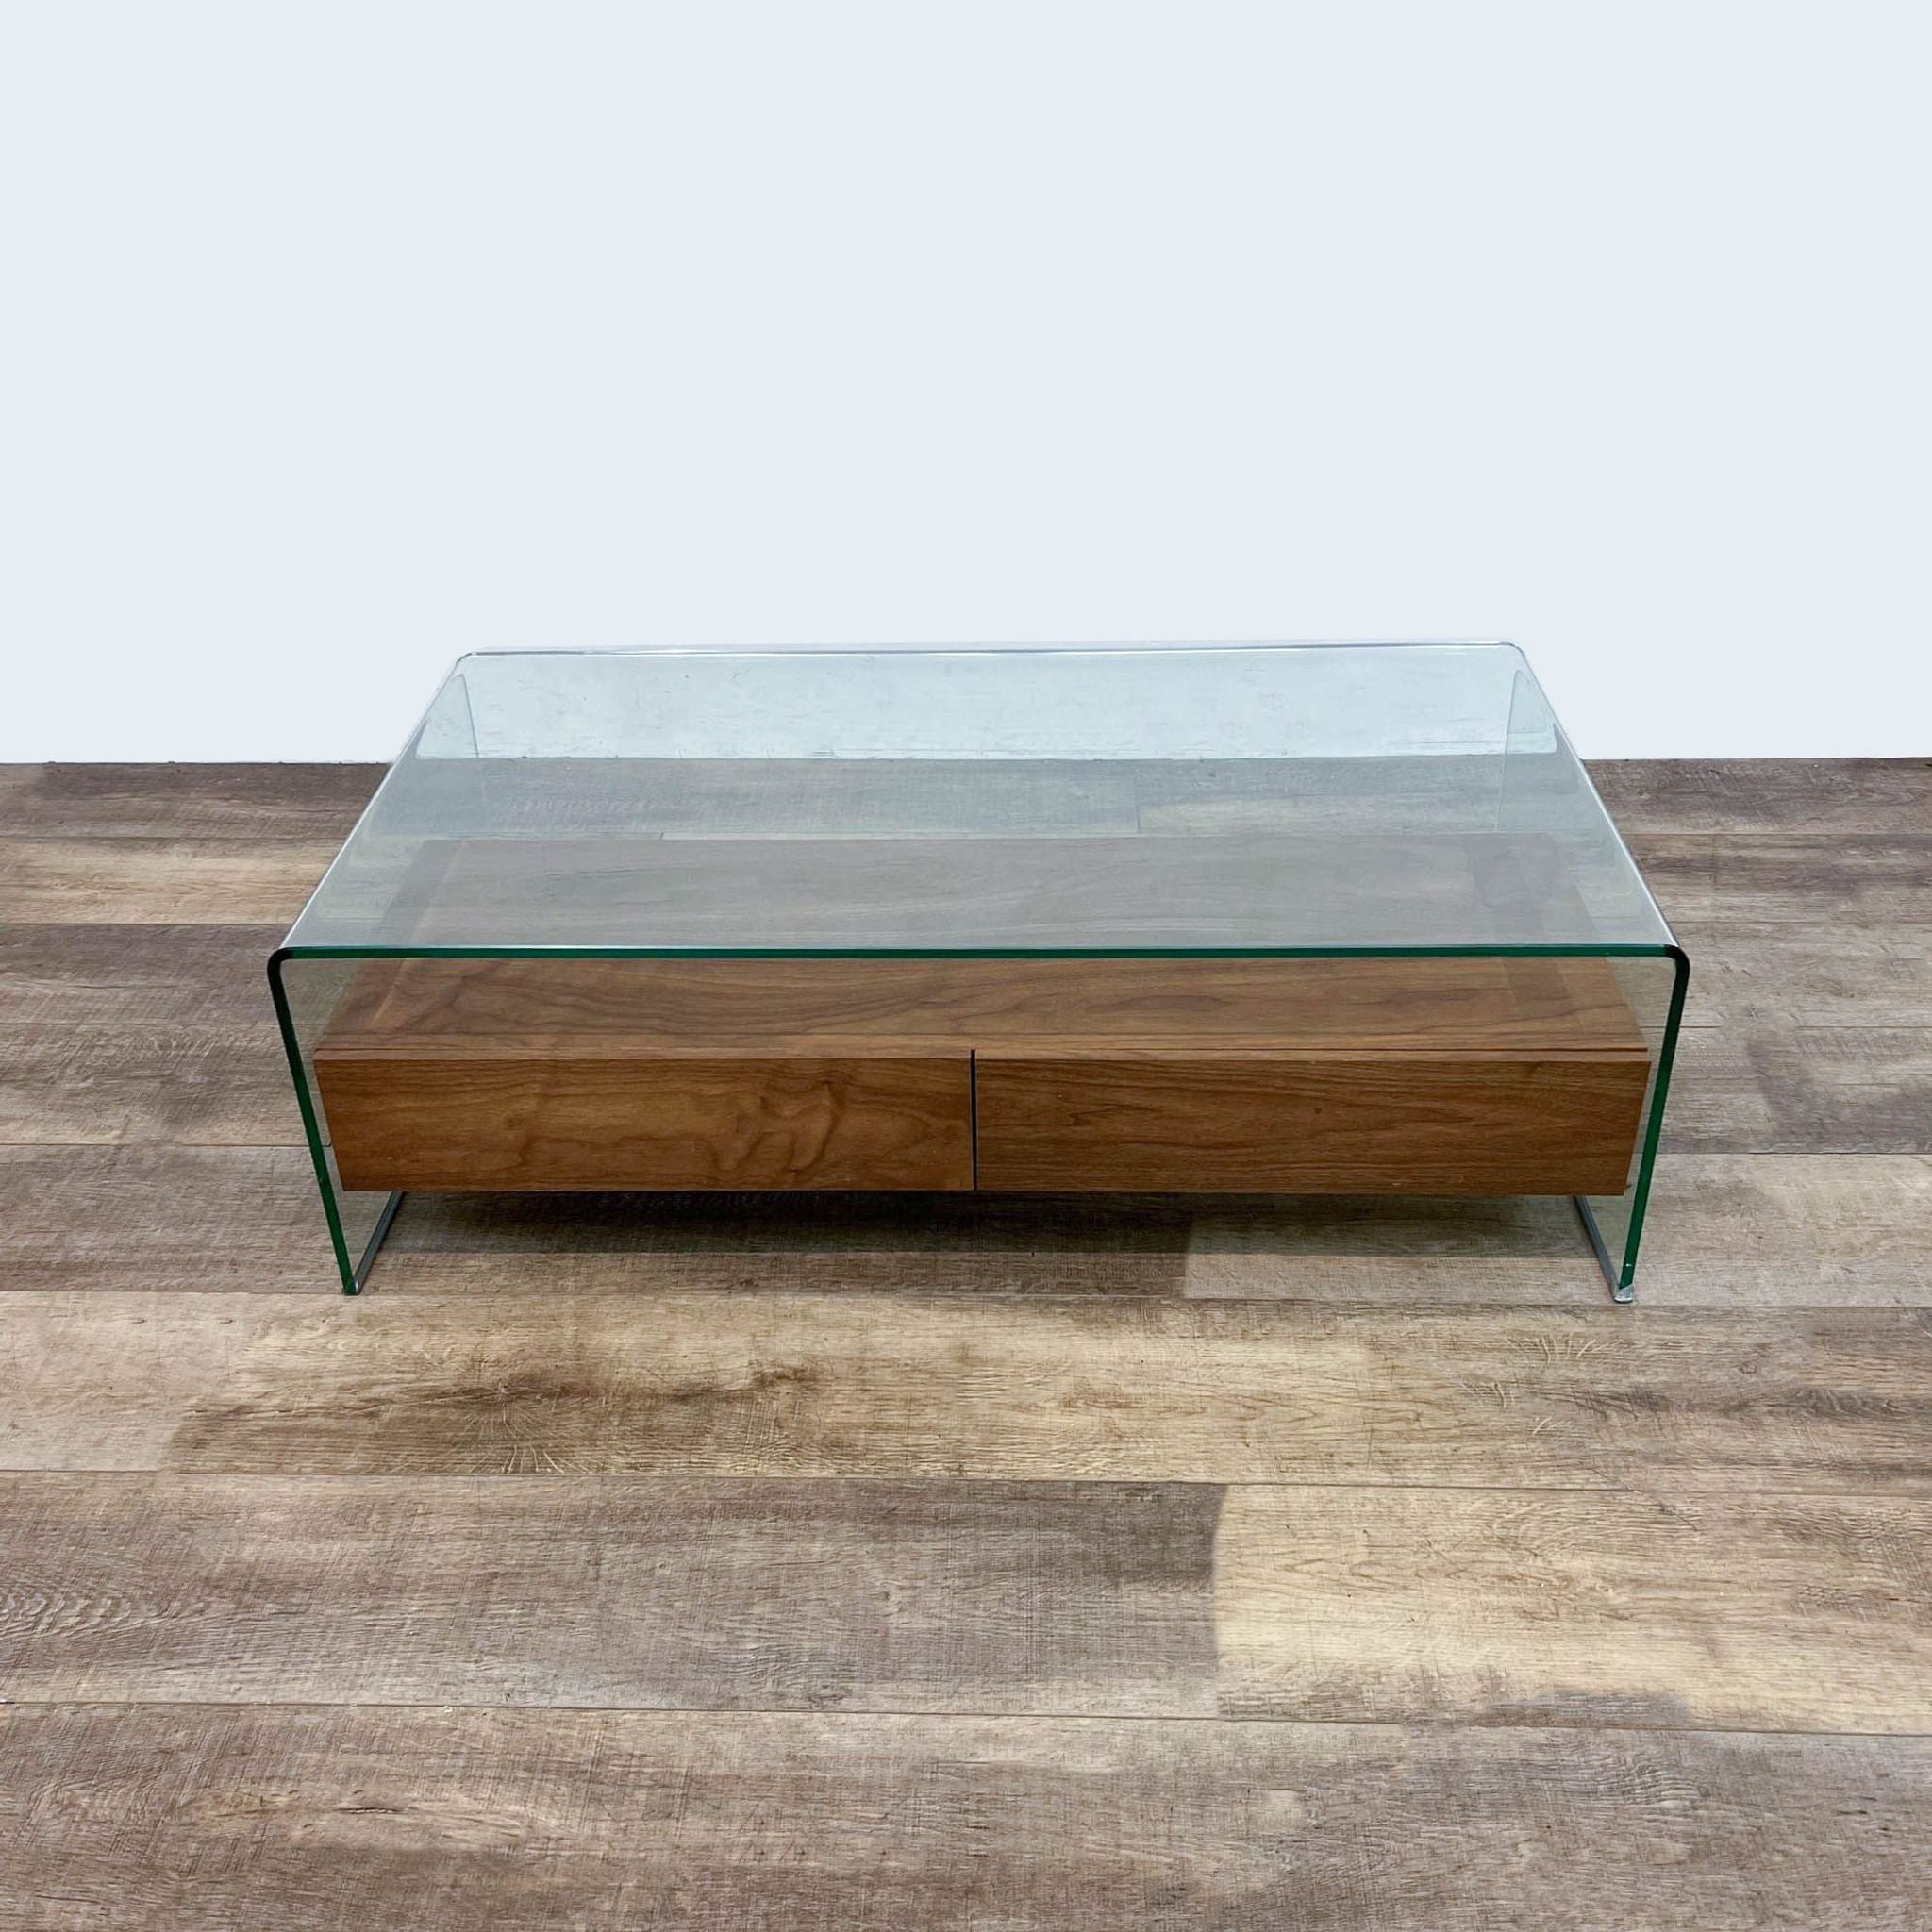 1. Zuo Modern coffee table with a clear glass waterfall design and two closed walnut drawers on a wooden floor.